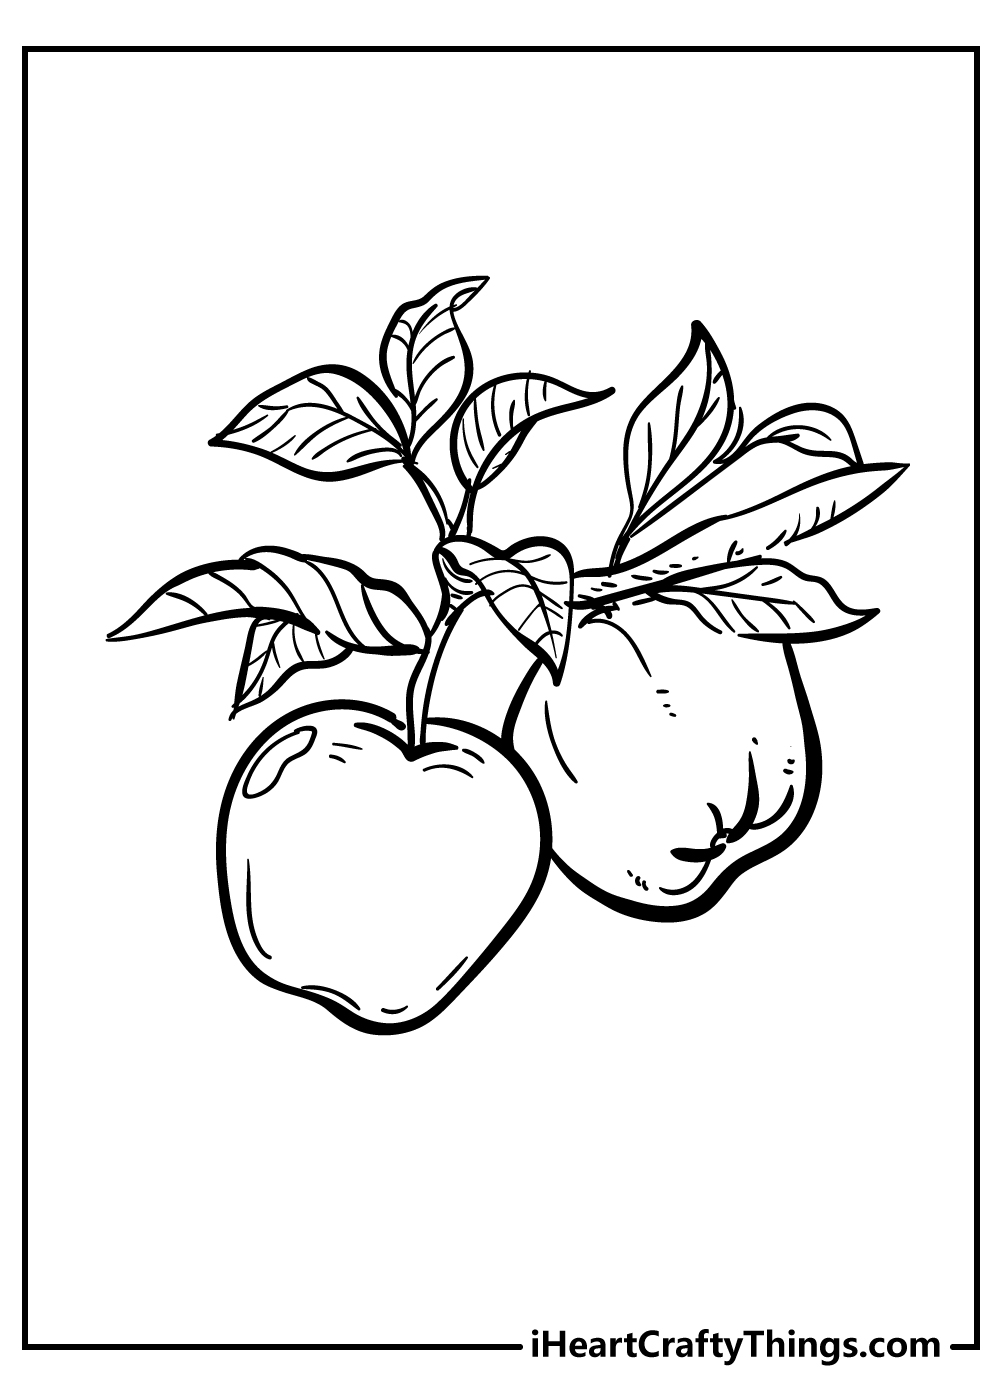 Apple Coloring sheets free download